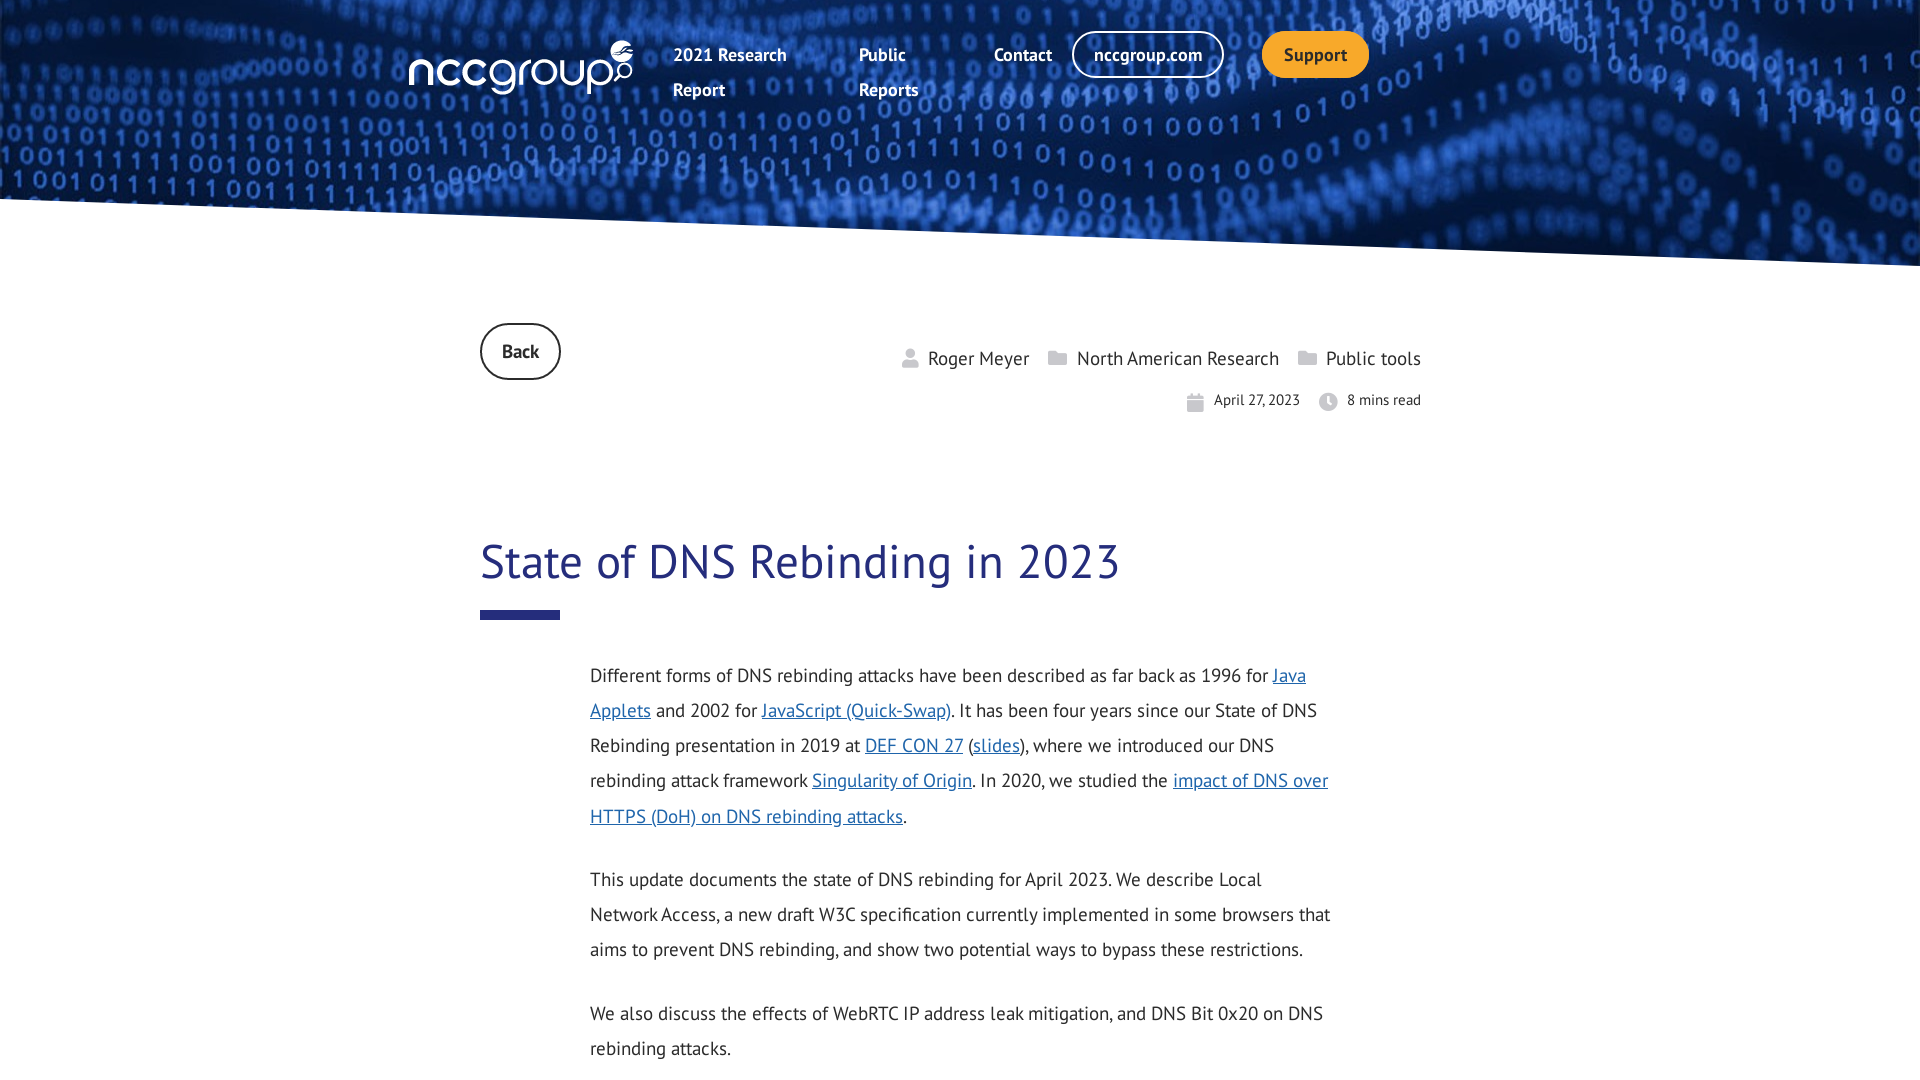 State of DNS Rebinding in 2023 | NCC Group Research Blog | Making the world safer and more secure